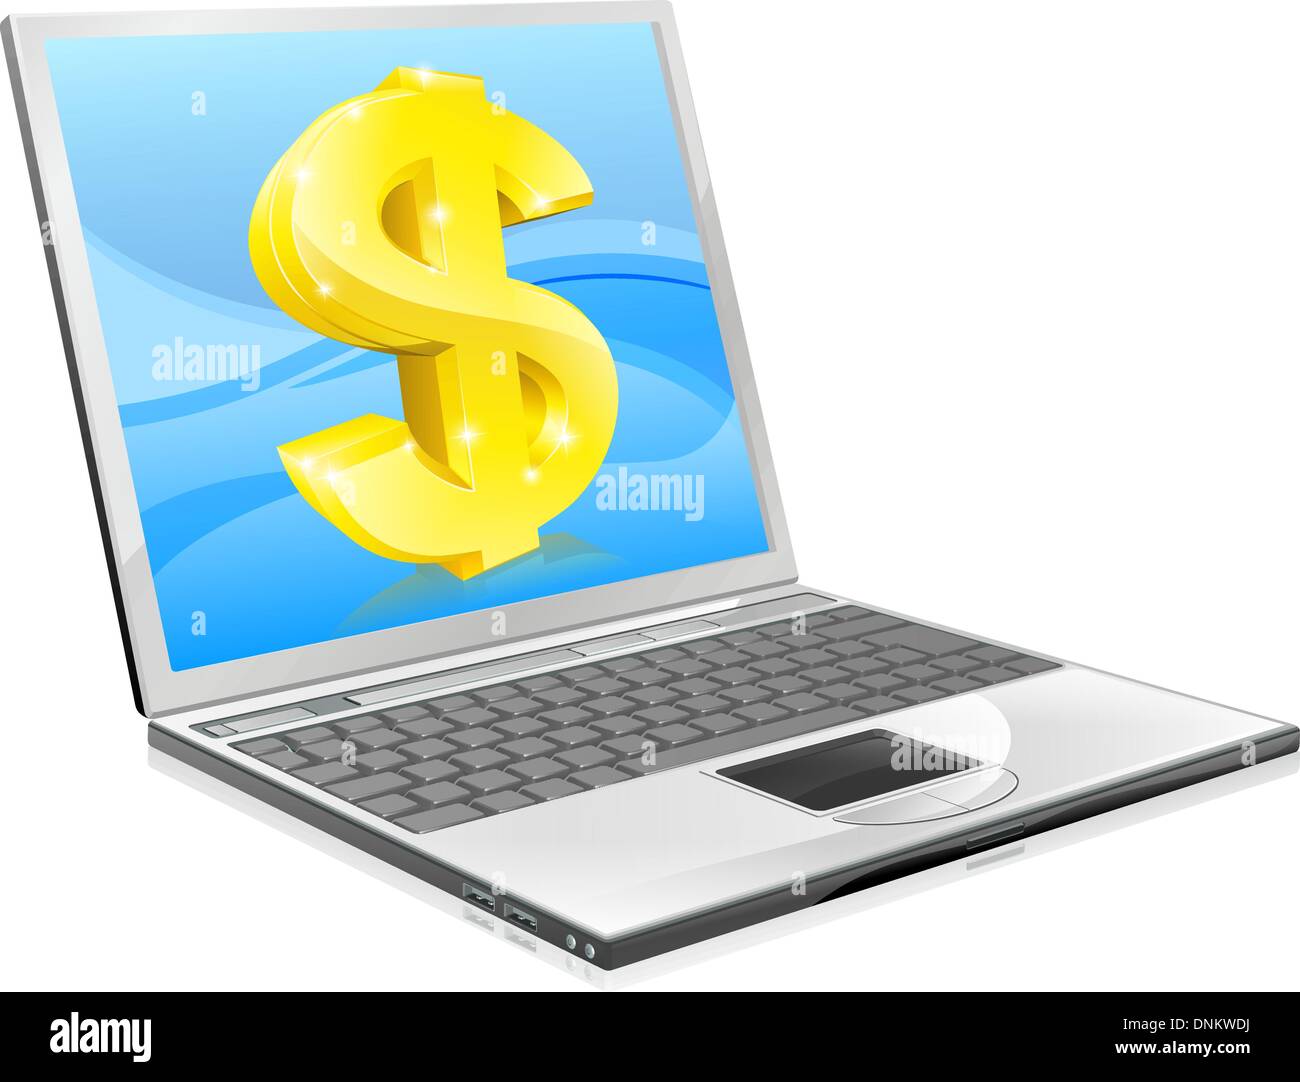 Illustration of laptop computer with dollar coming out of screen. Concept for home working or making money online or coupons, af Stock Vector